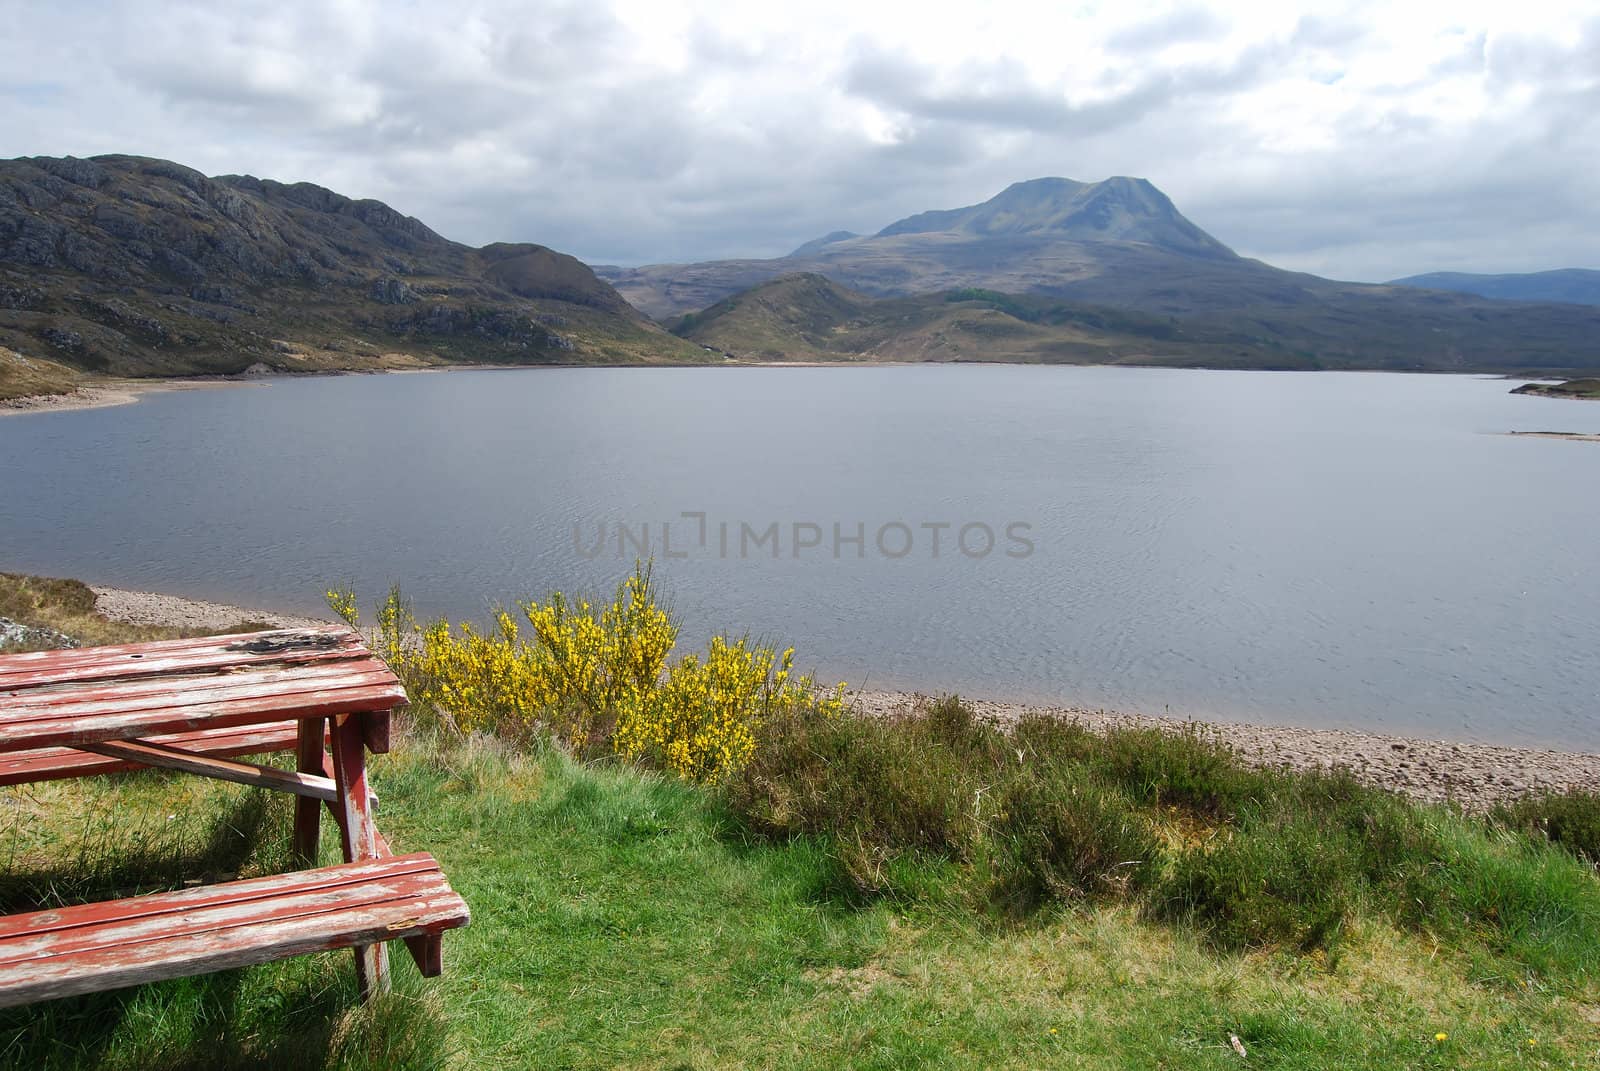 Picnic table at a beautiful lake surrounded by mountains